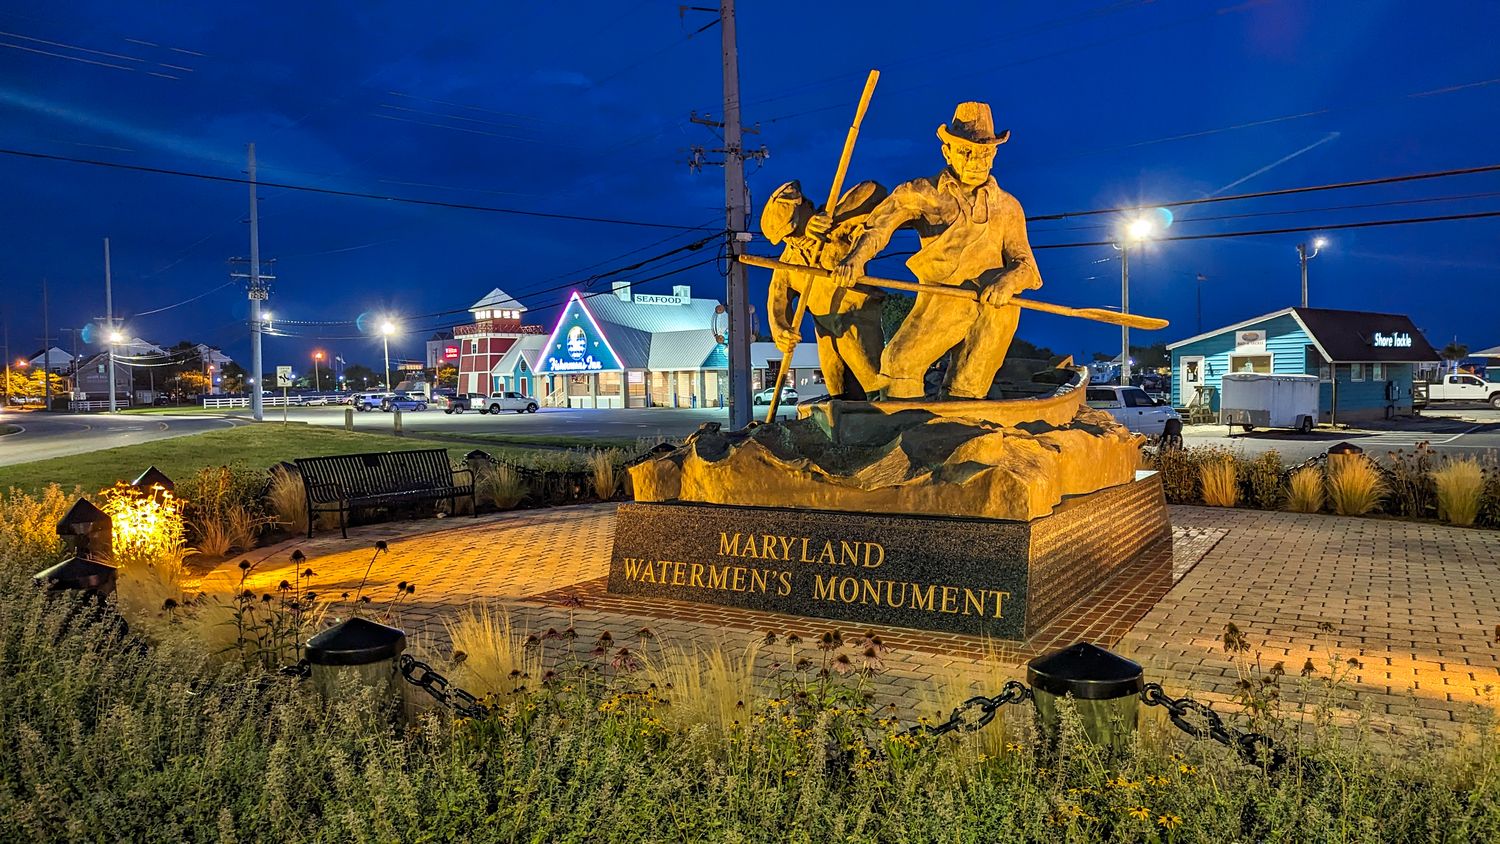 The Maryland Watermen’s Monument at nighttime in Kent Narrows, MD.